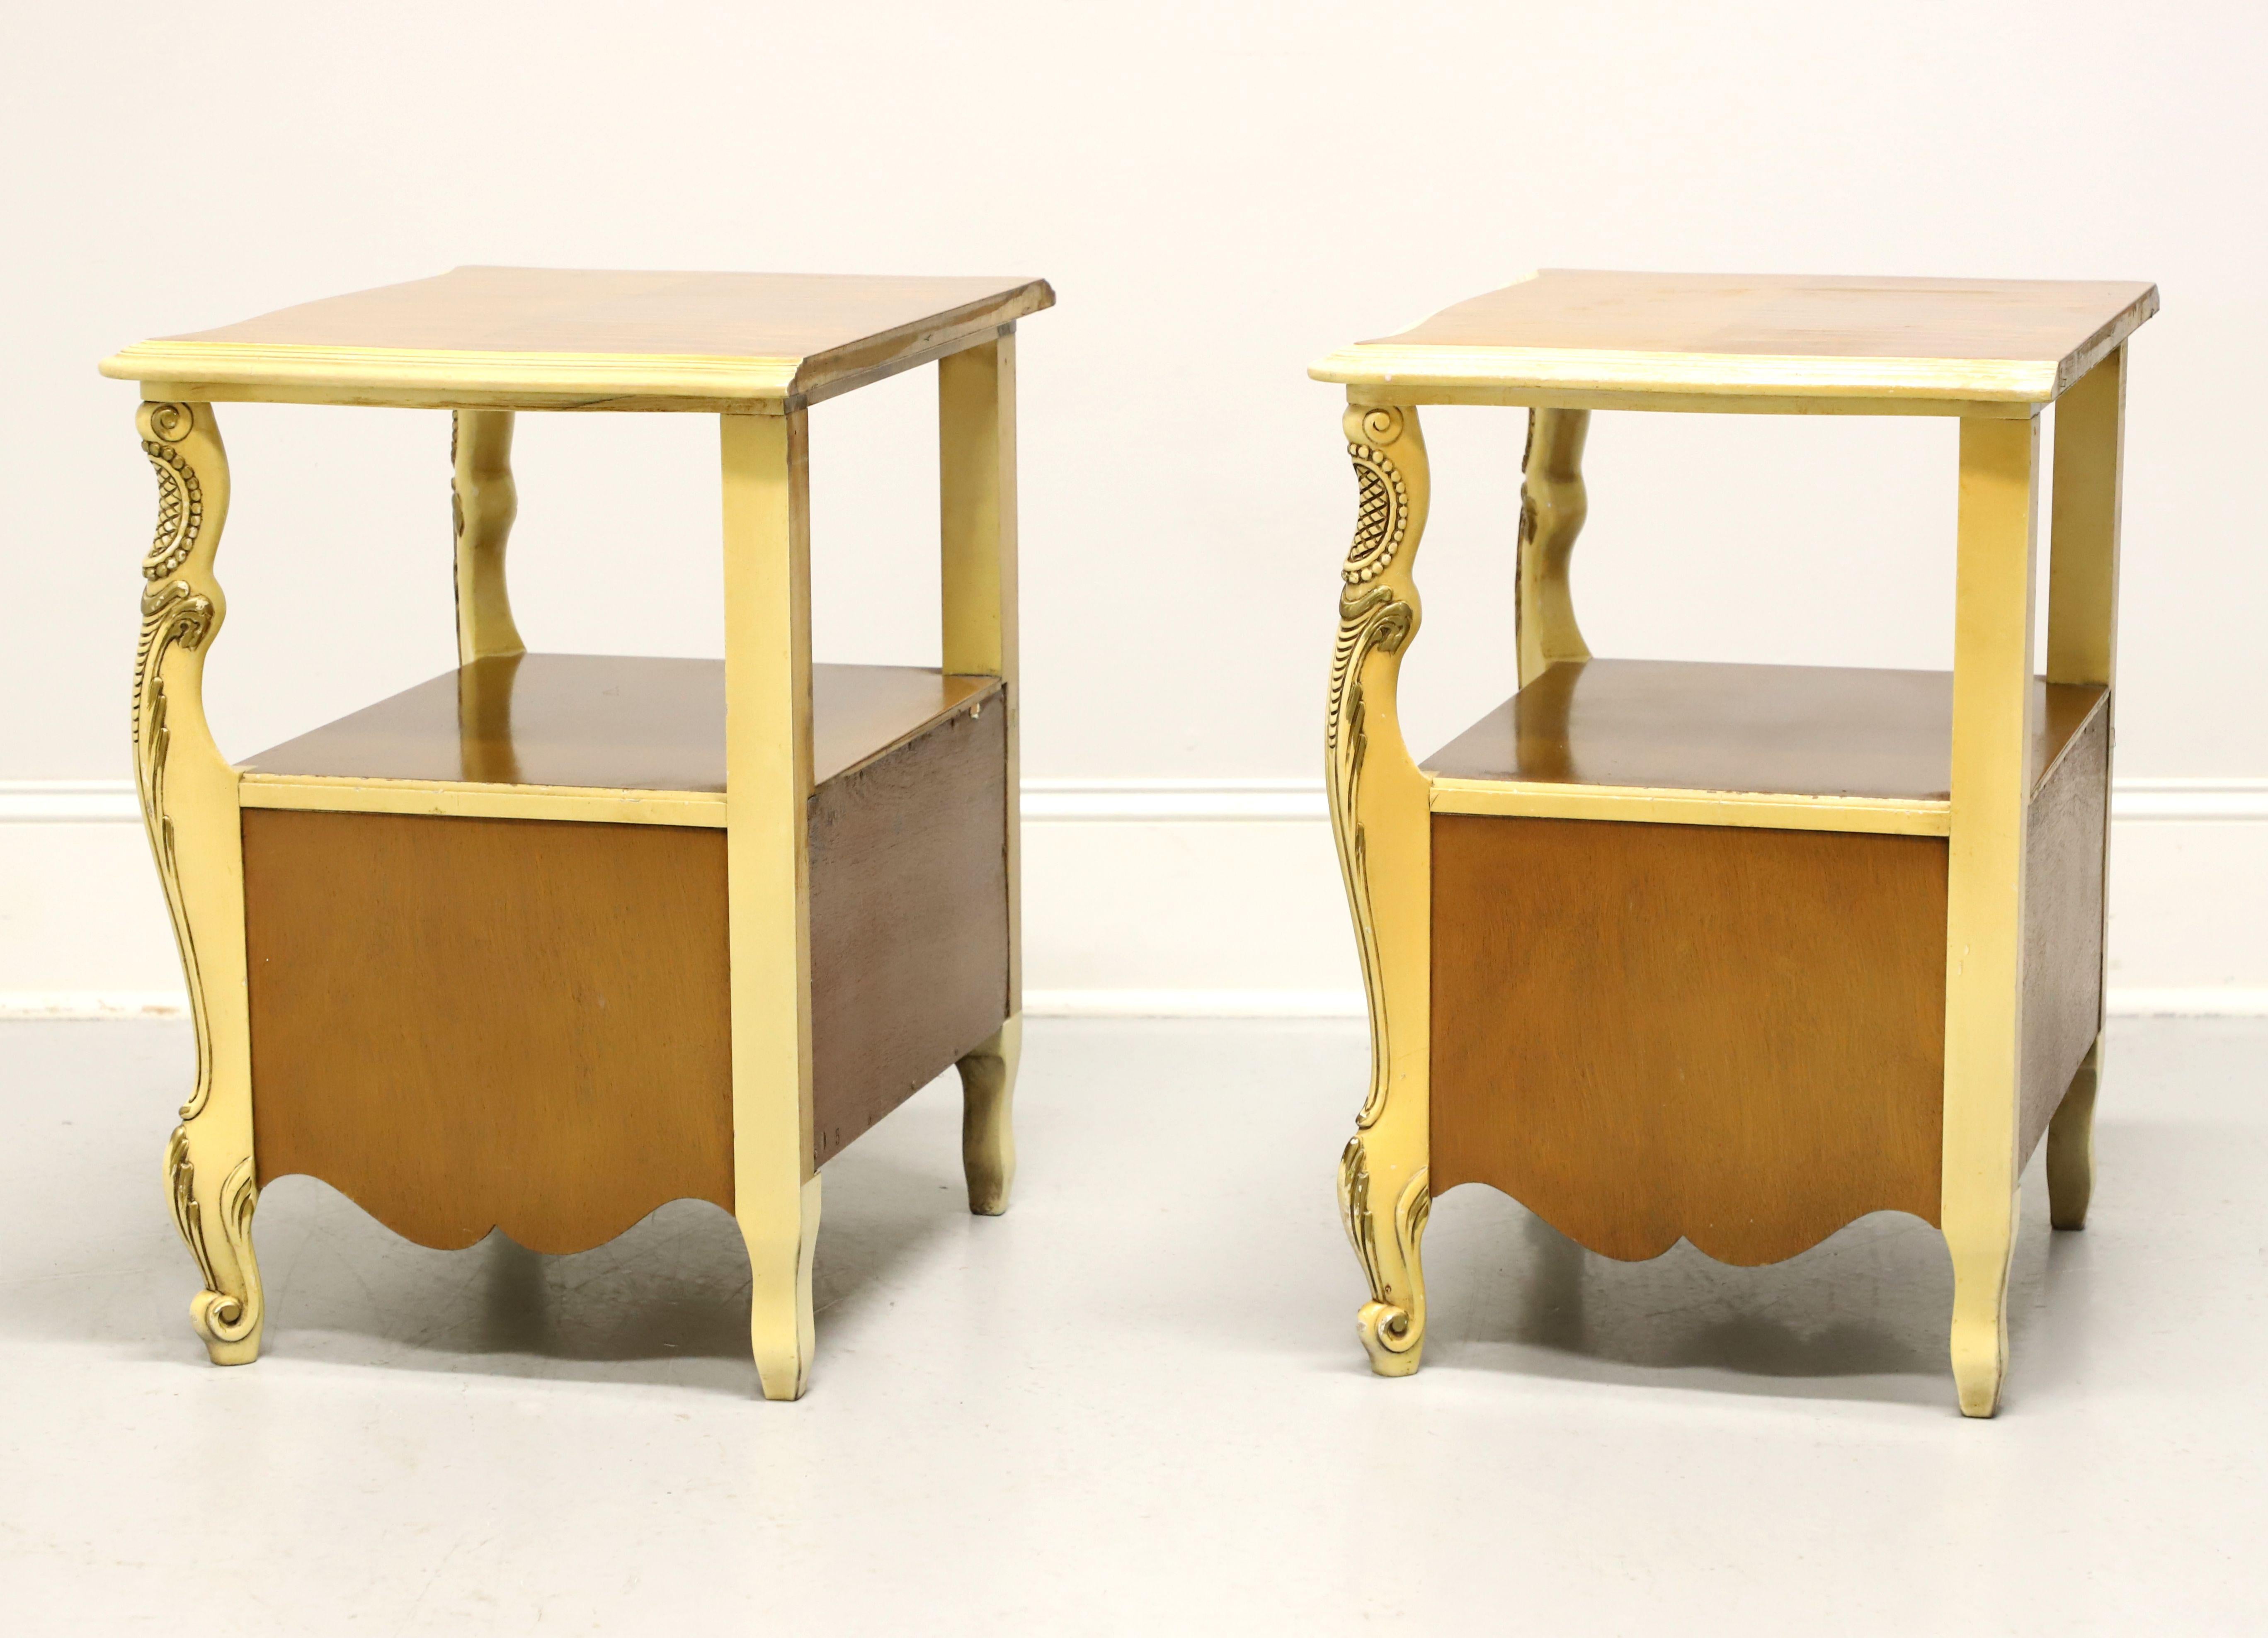 ROMWEBER Mid 20th Century Satinwood French Provincial Nightstands - Pair In Good Condition For Sale In Charlotte, NC